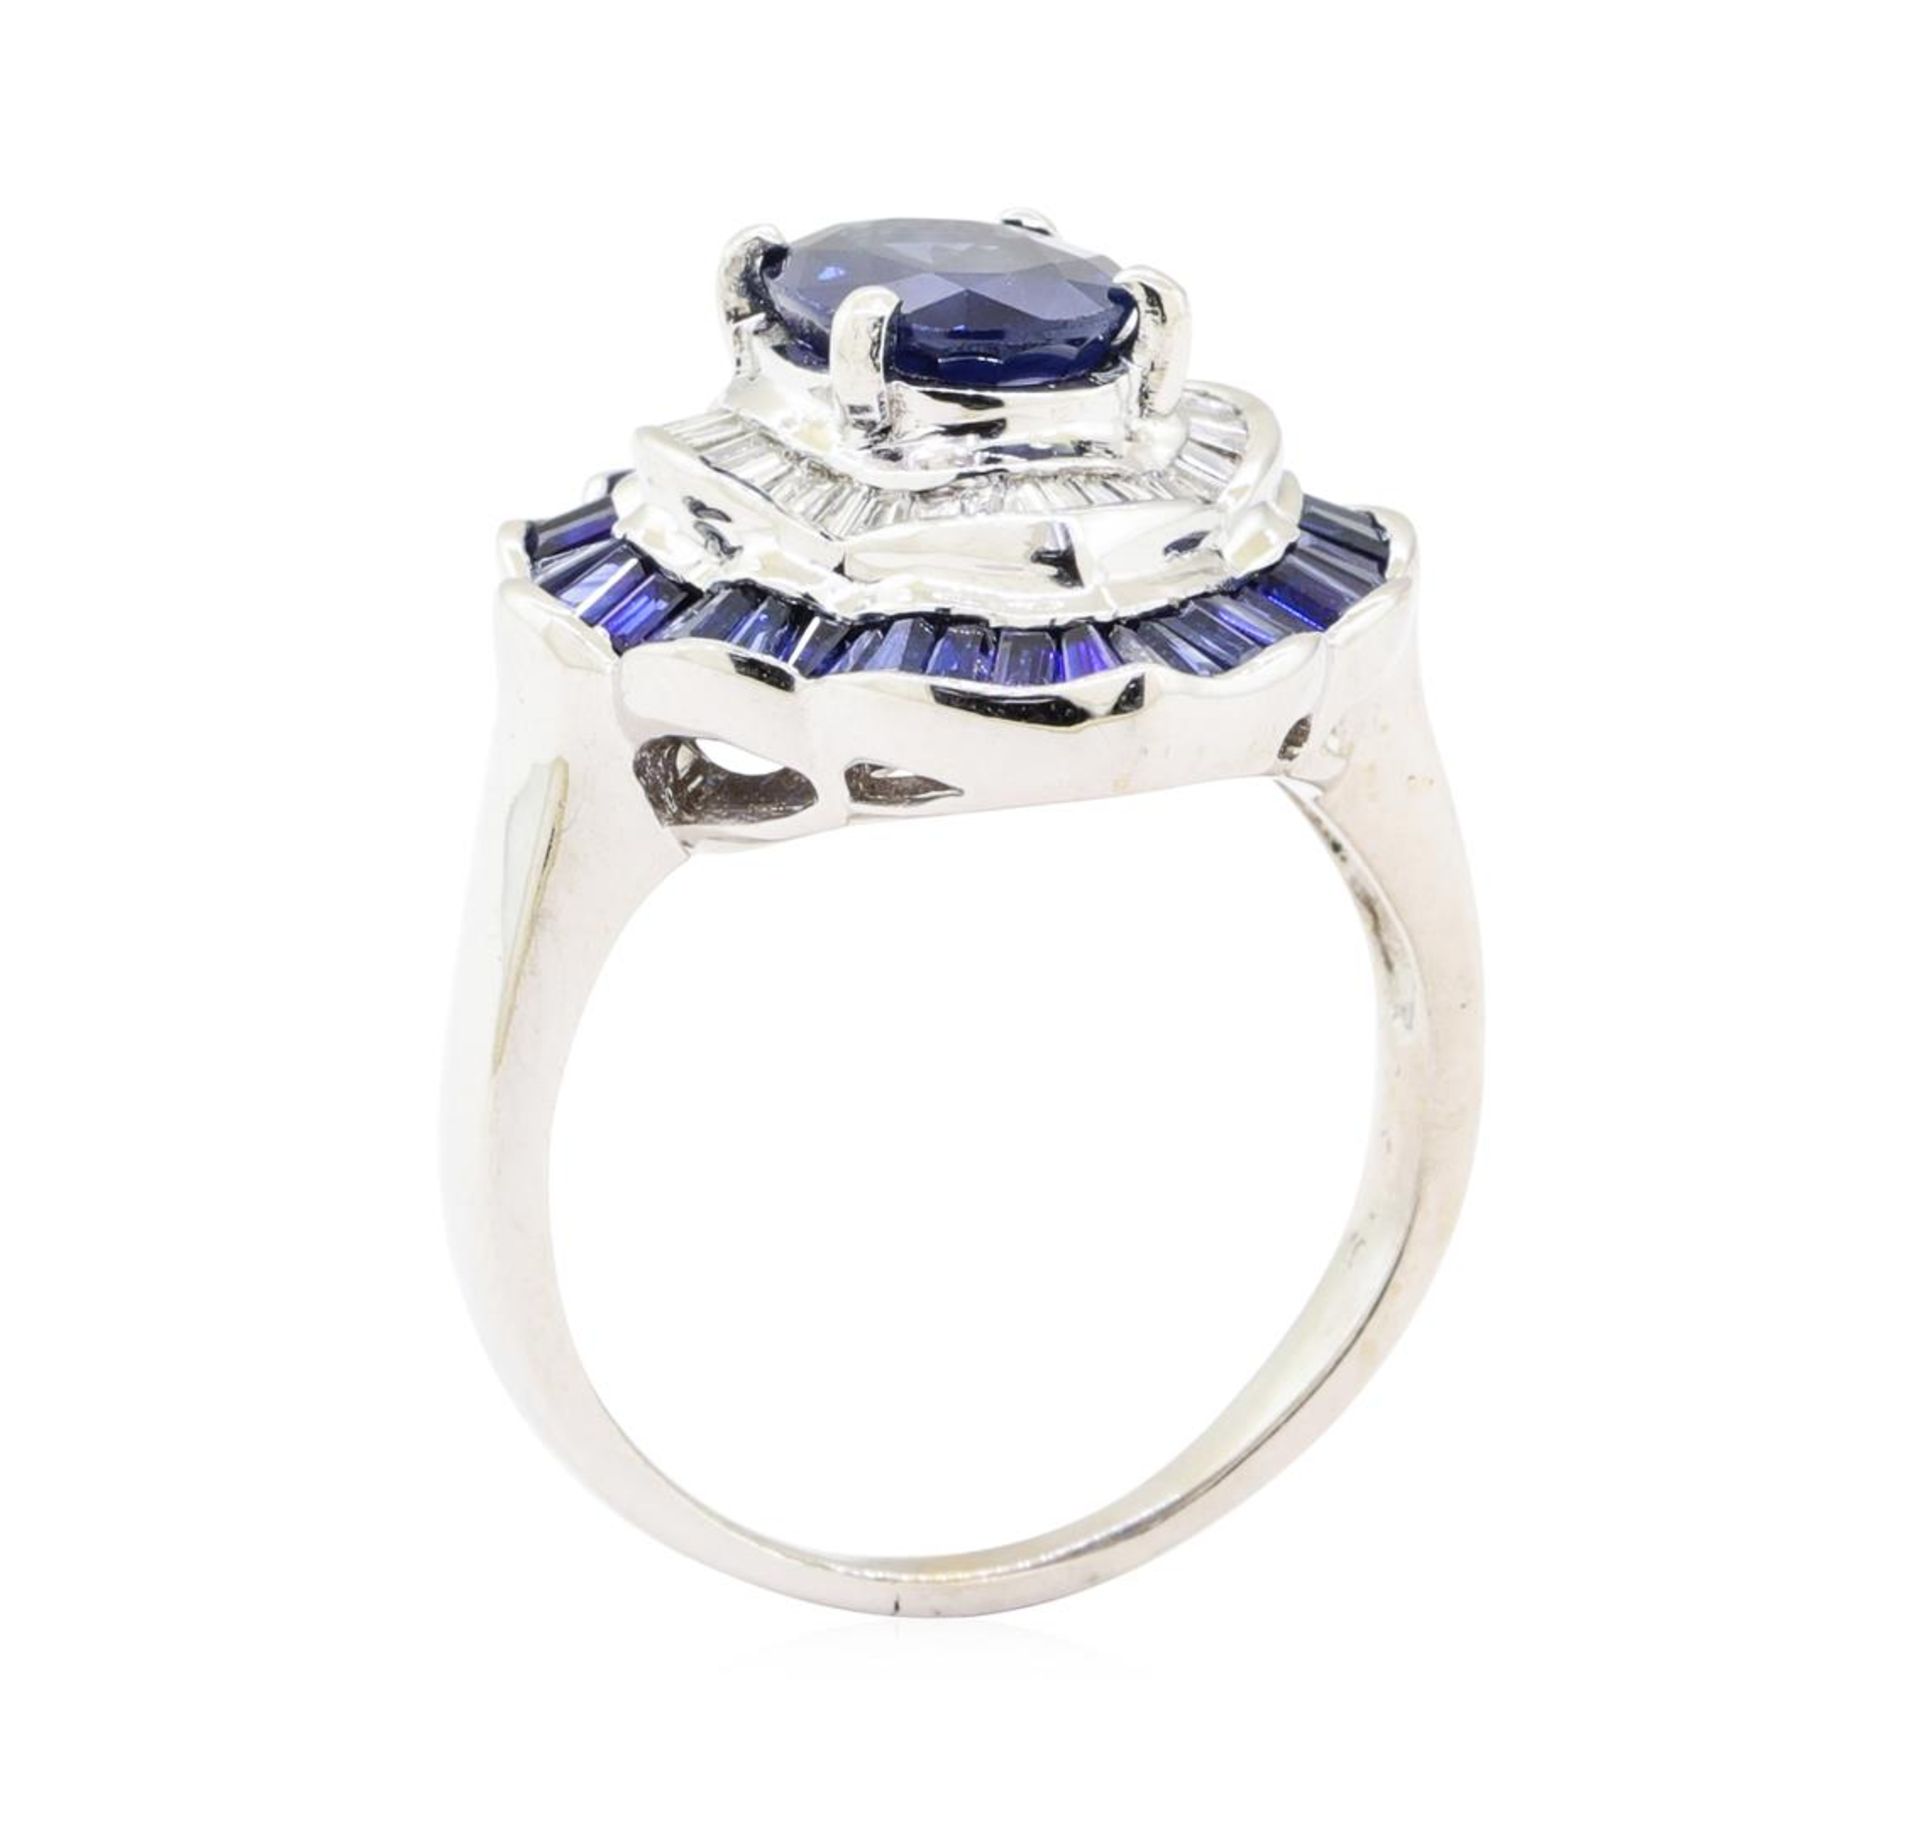 3.20 ctw Sapphire and Diamond Ring - 14KT White Gold - Image 4 of 5